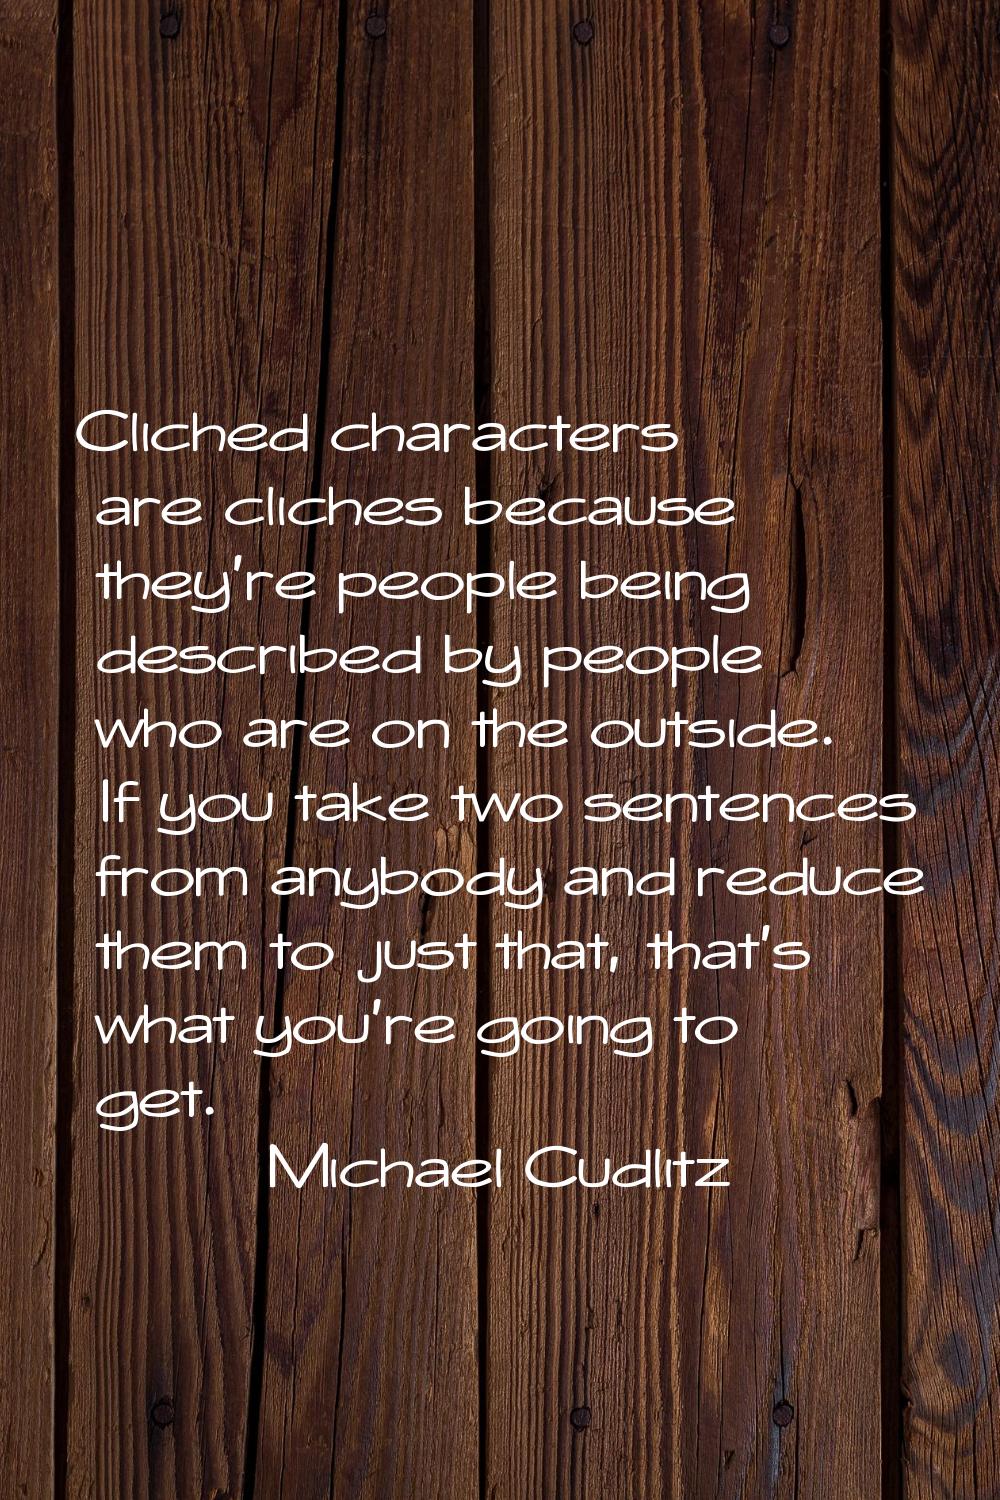 Cliched characters are cliches because they're people being described by people who are on the outs